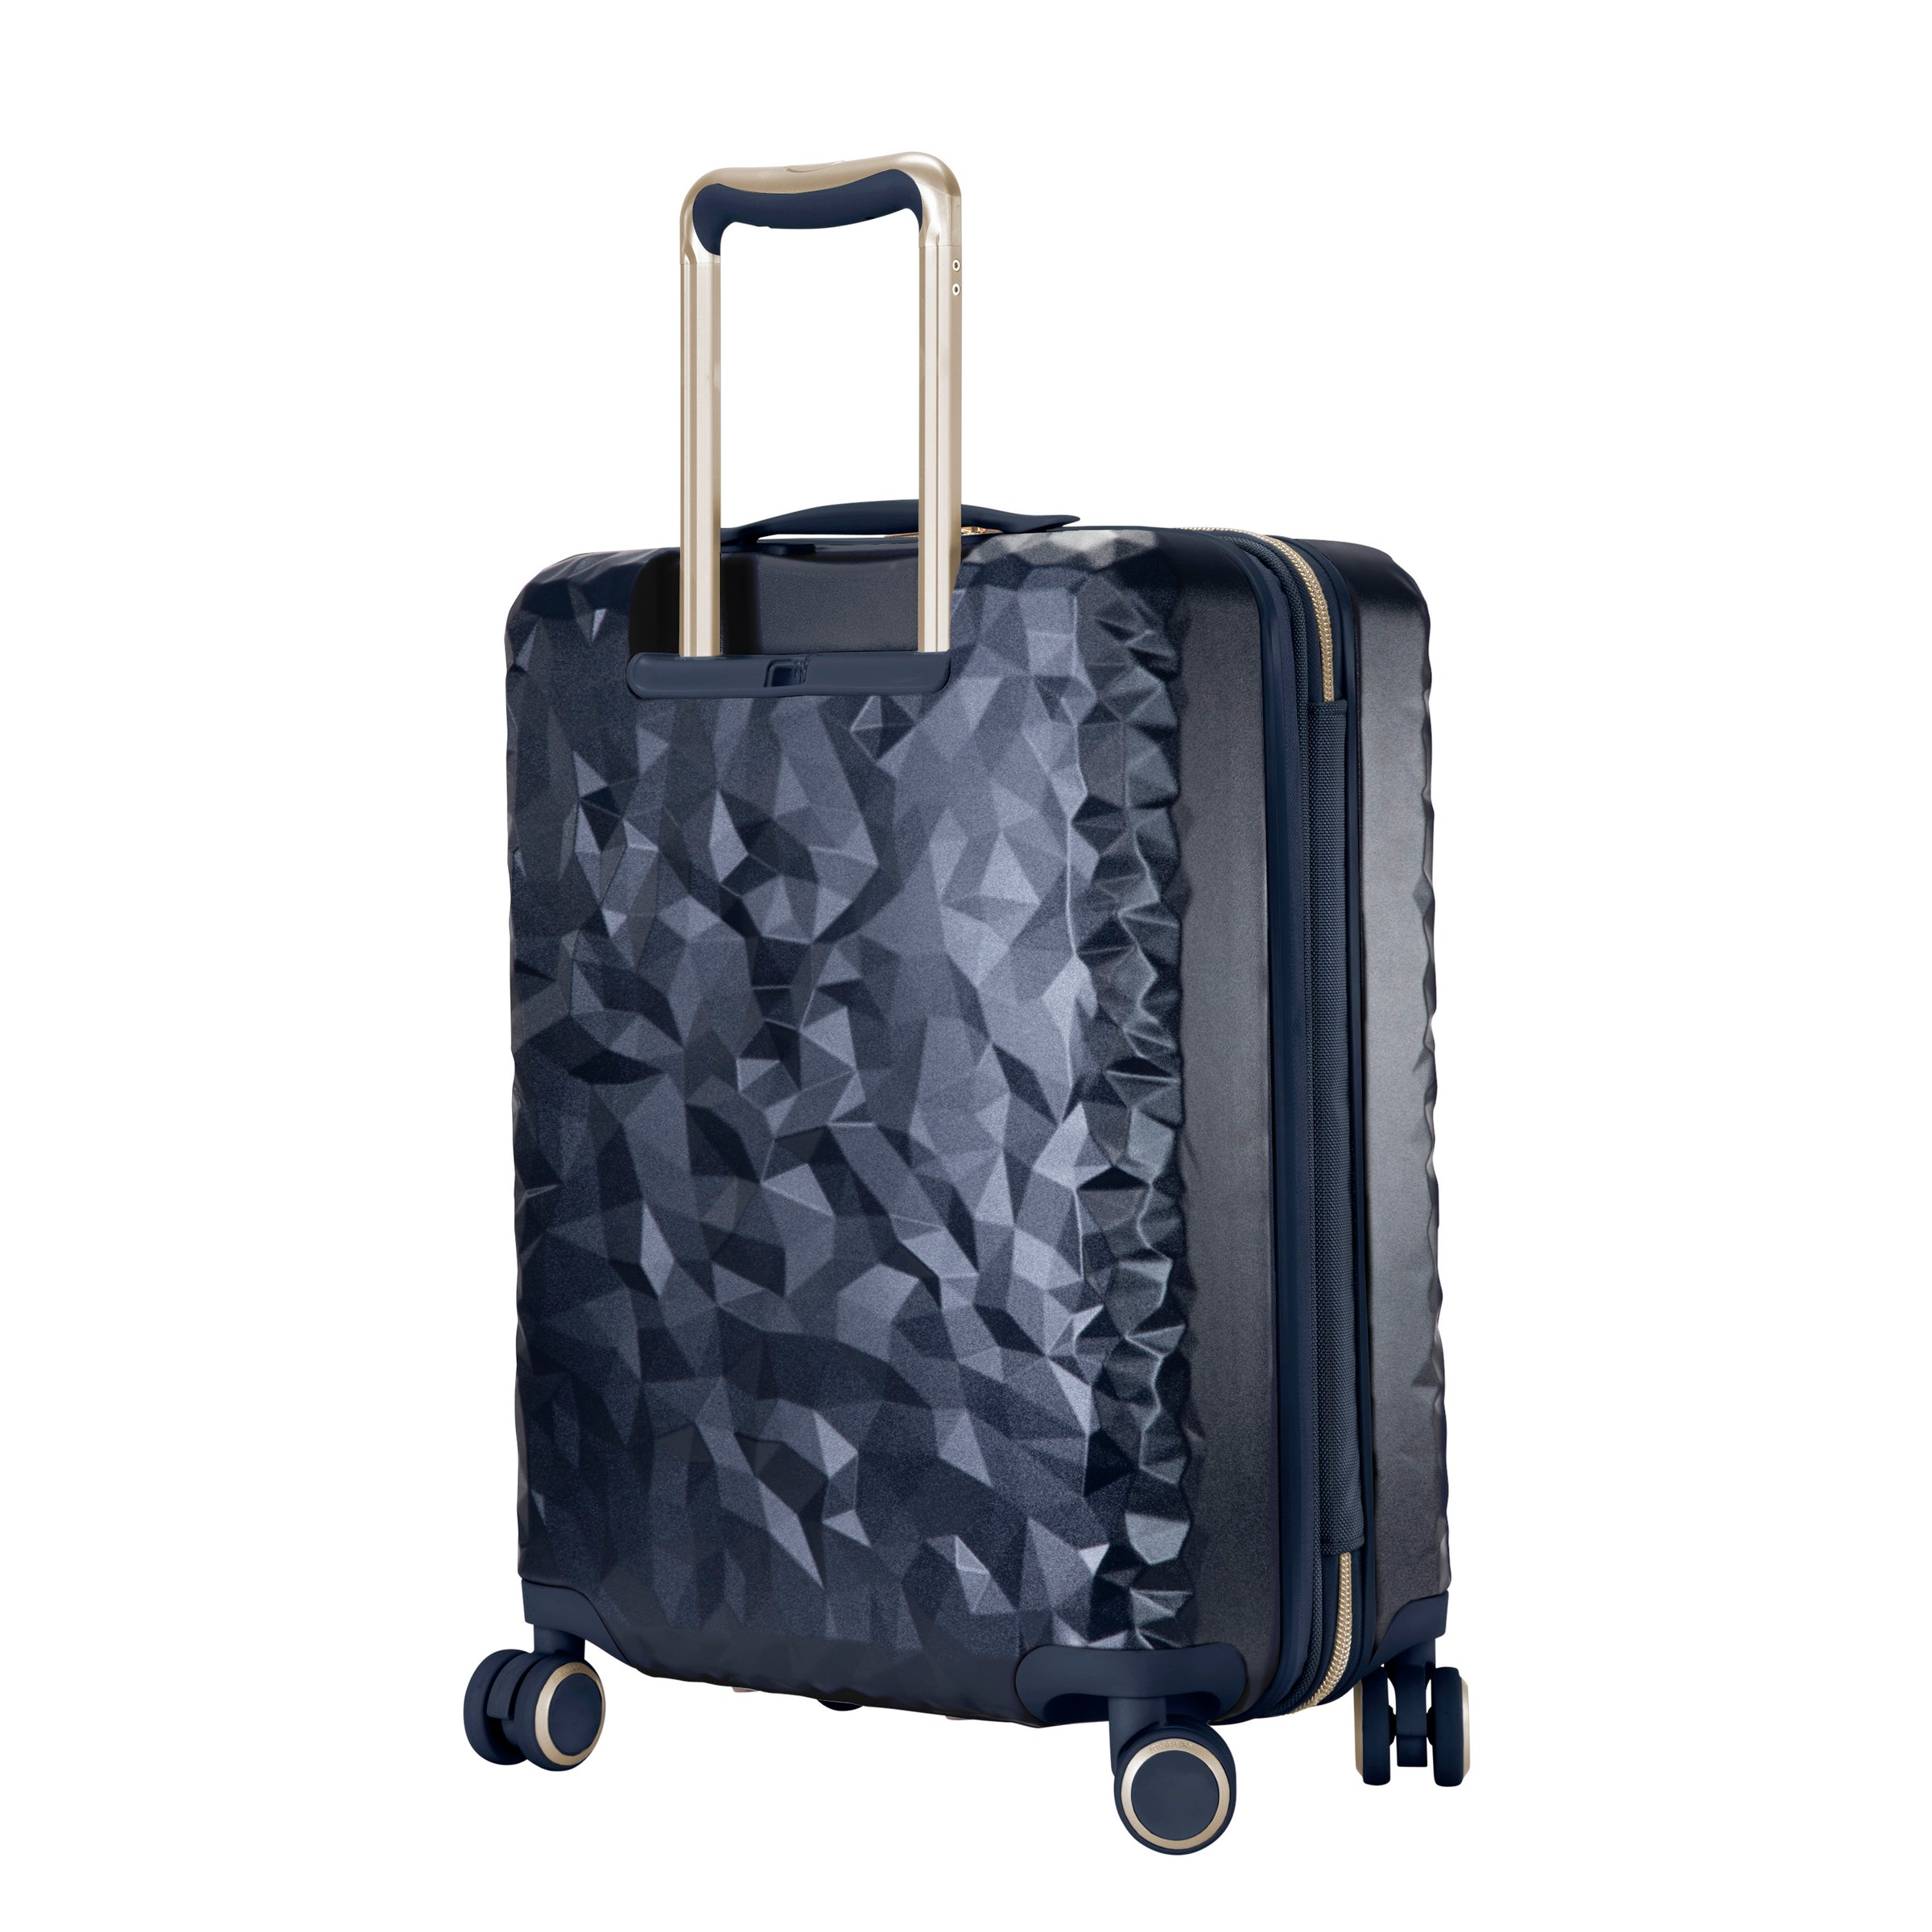 back view of textured navy blue carry-on case